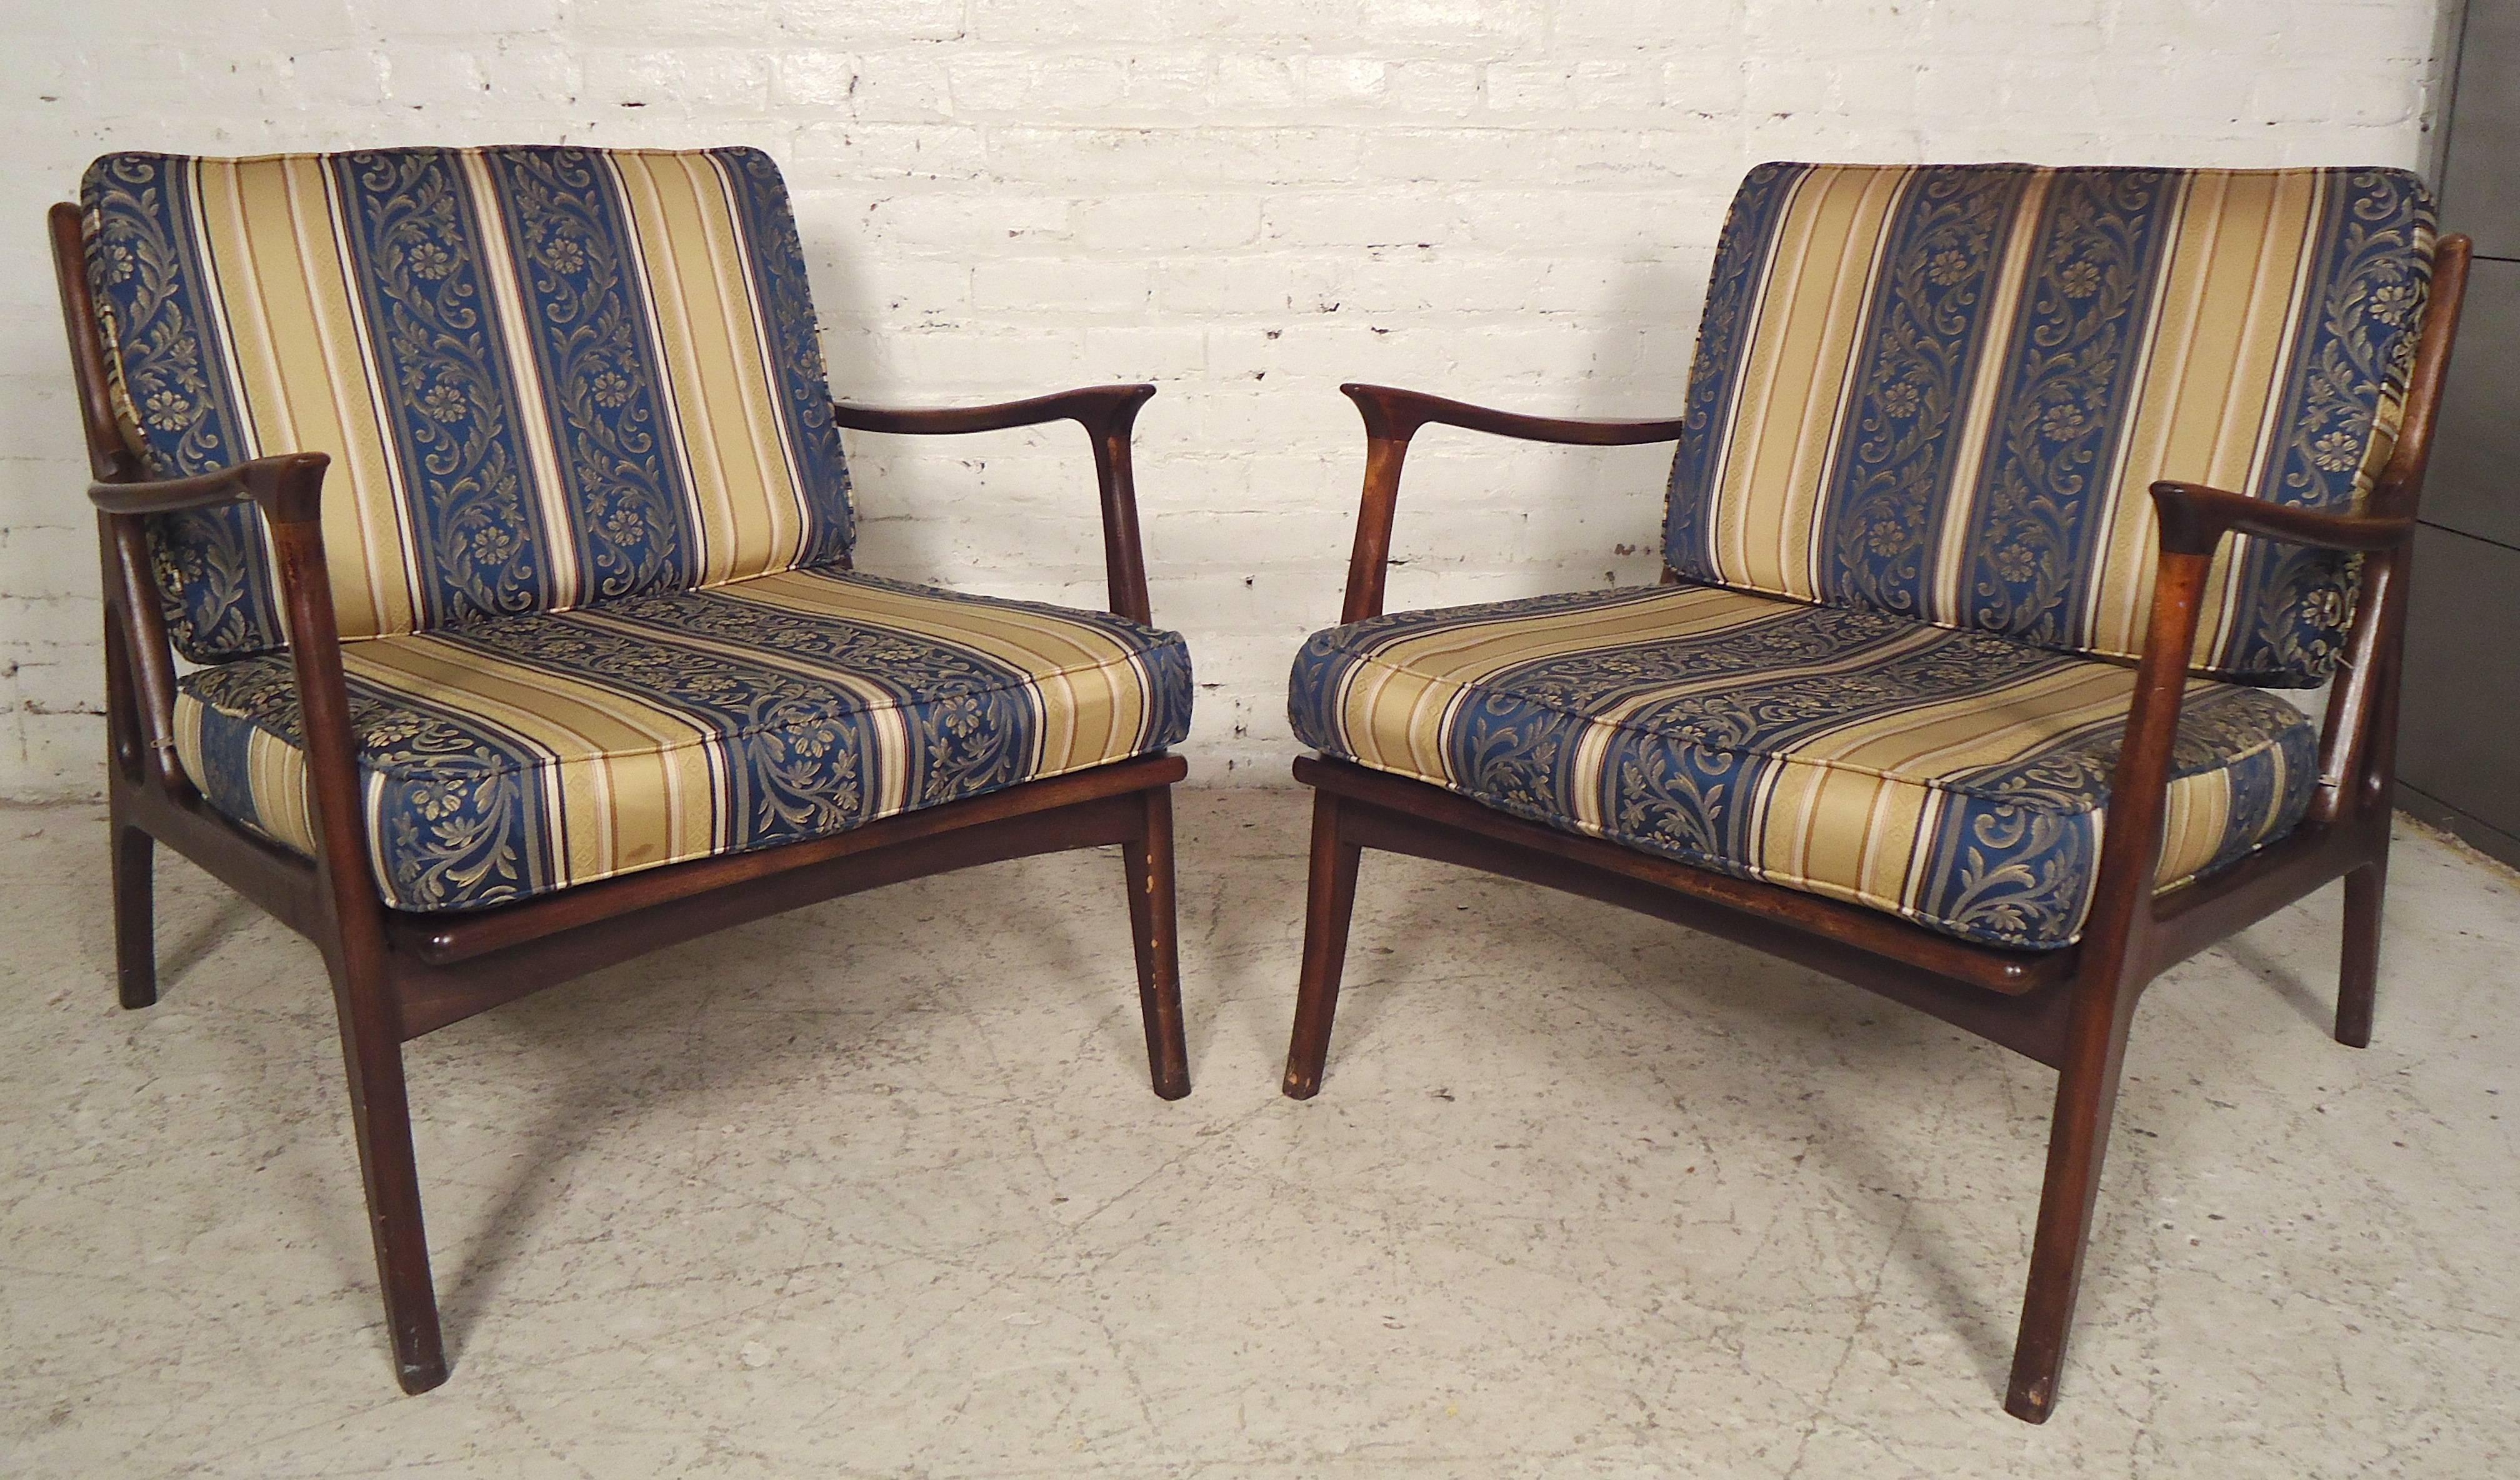 Highly designed vintage armchairs with dark wood color. Very unique sculpted locking frame with slatted back, tapered legs, formed arms.

(Please confirm item location - NY or NJ - with dealer).
   